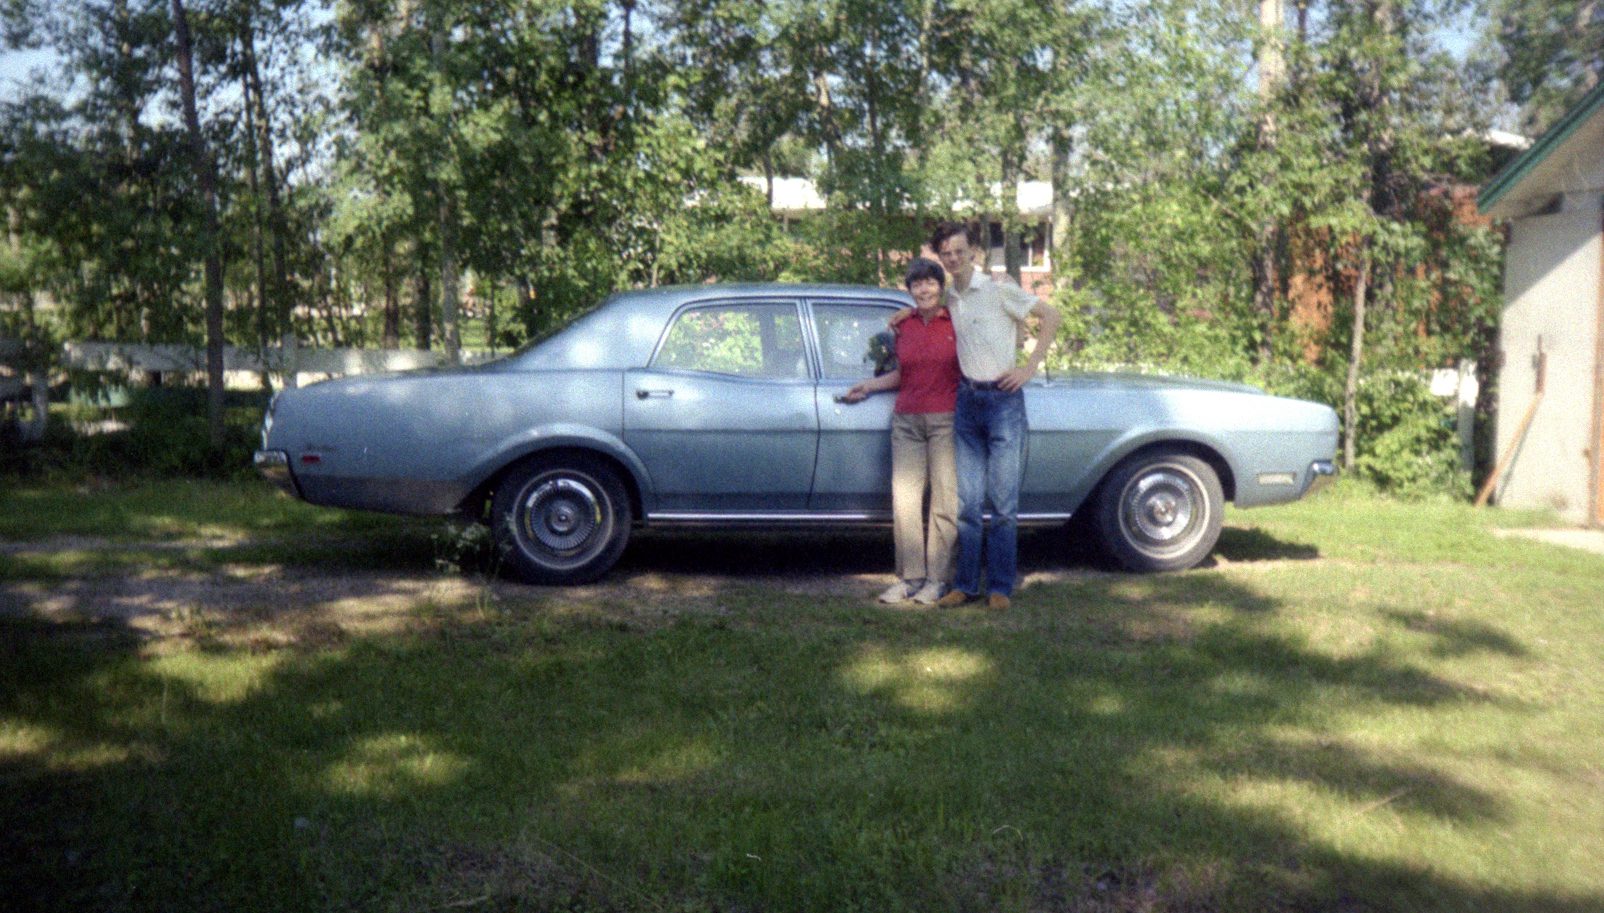 Frances with her son and car in 1984